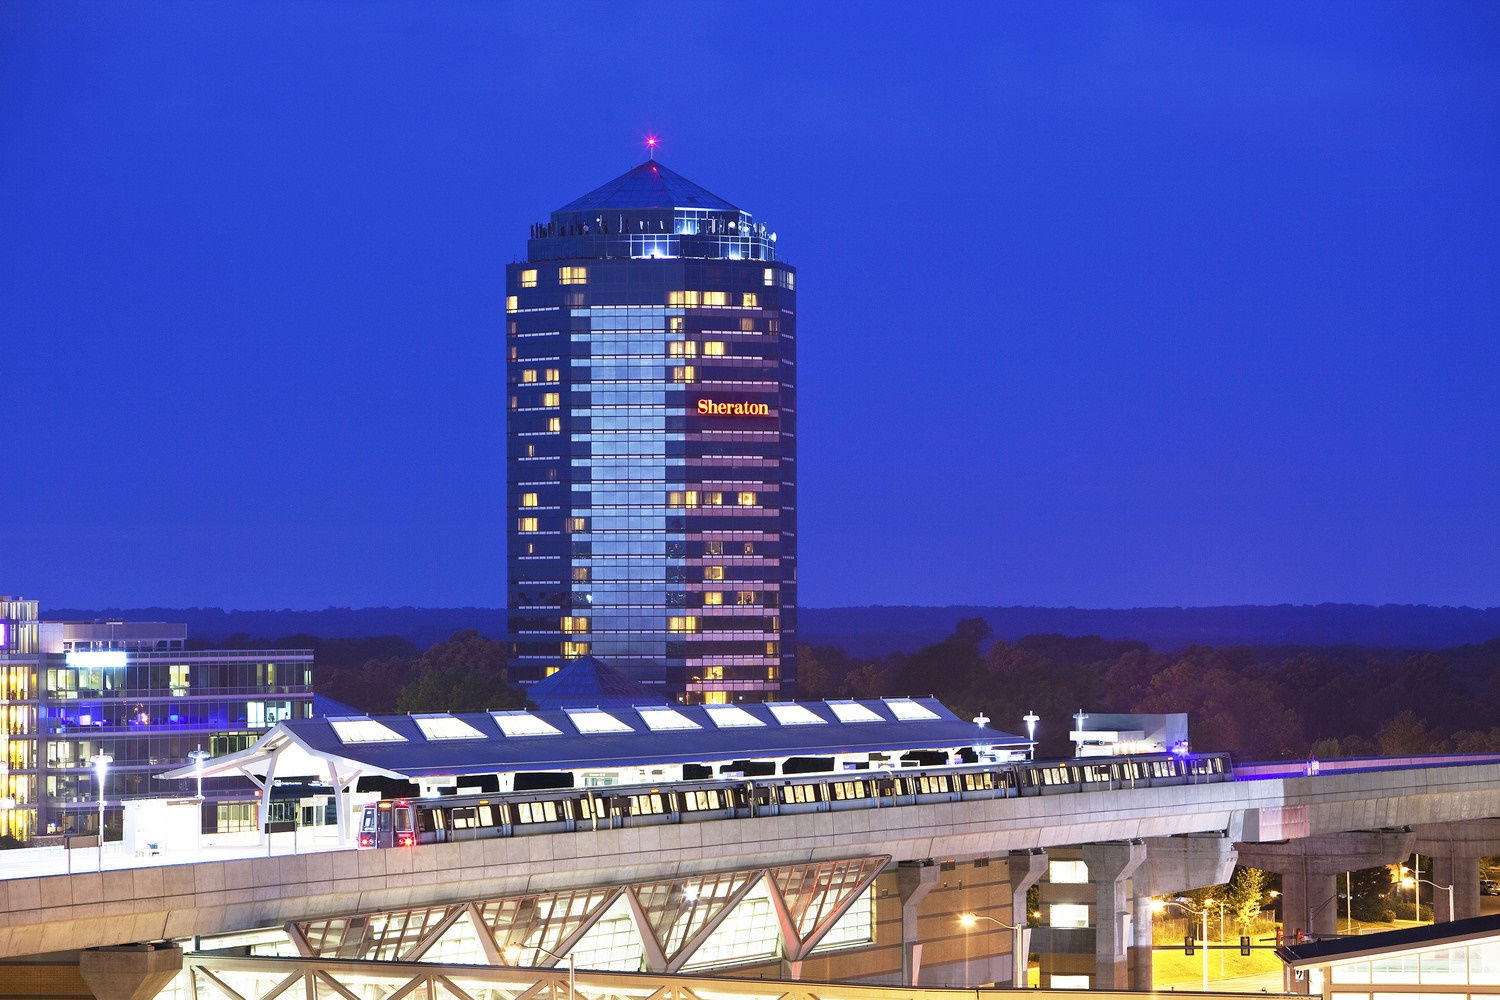 Sheraton Tysons Hotels – steps from Metrorail connects to Washington, DC